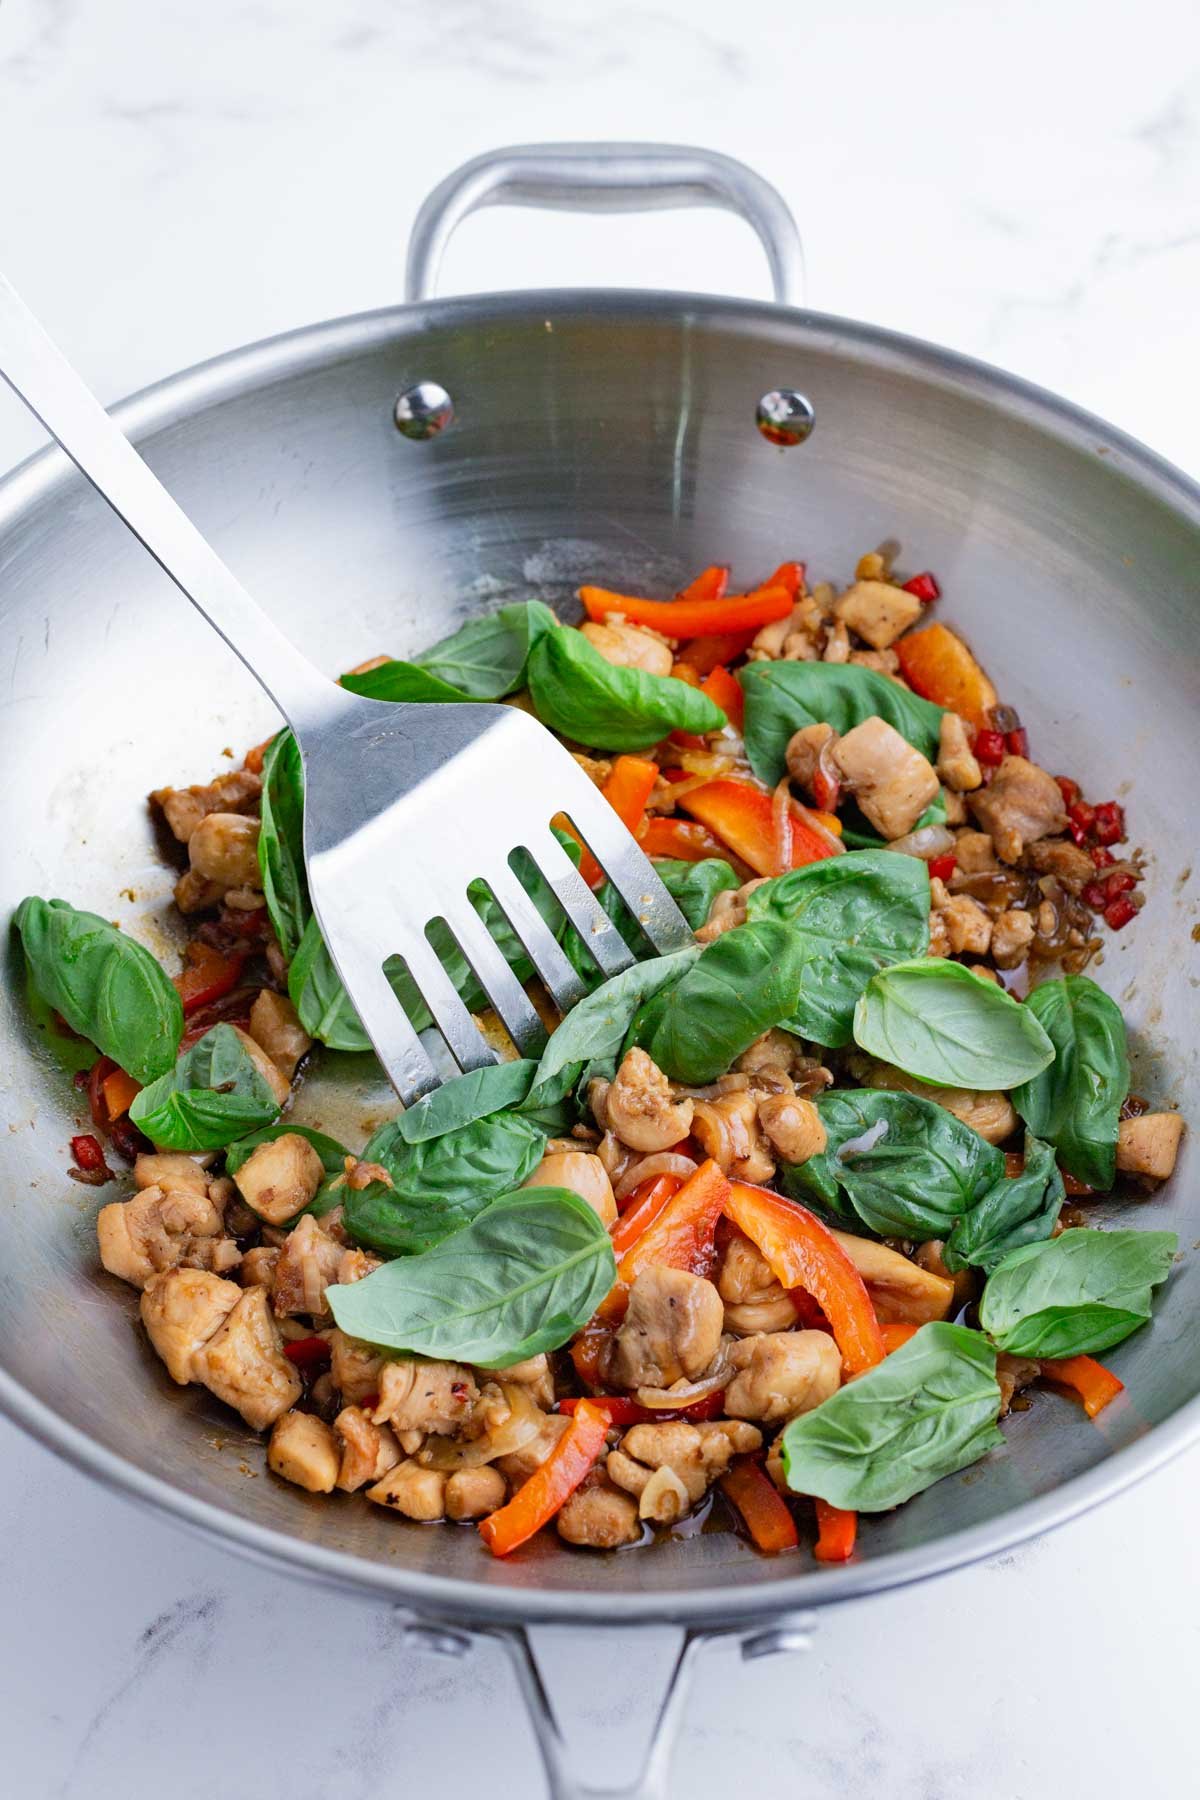 Basil is added to the wok with the chicken.